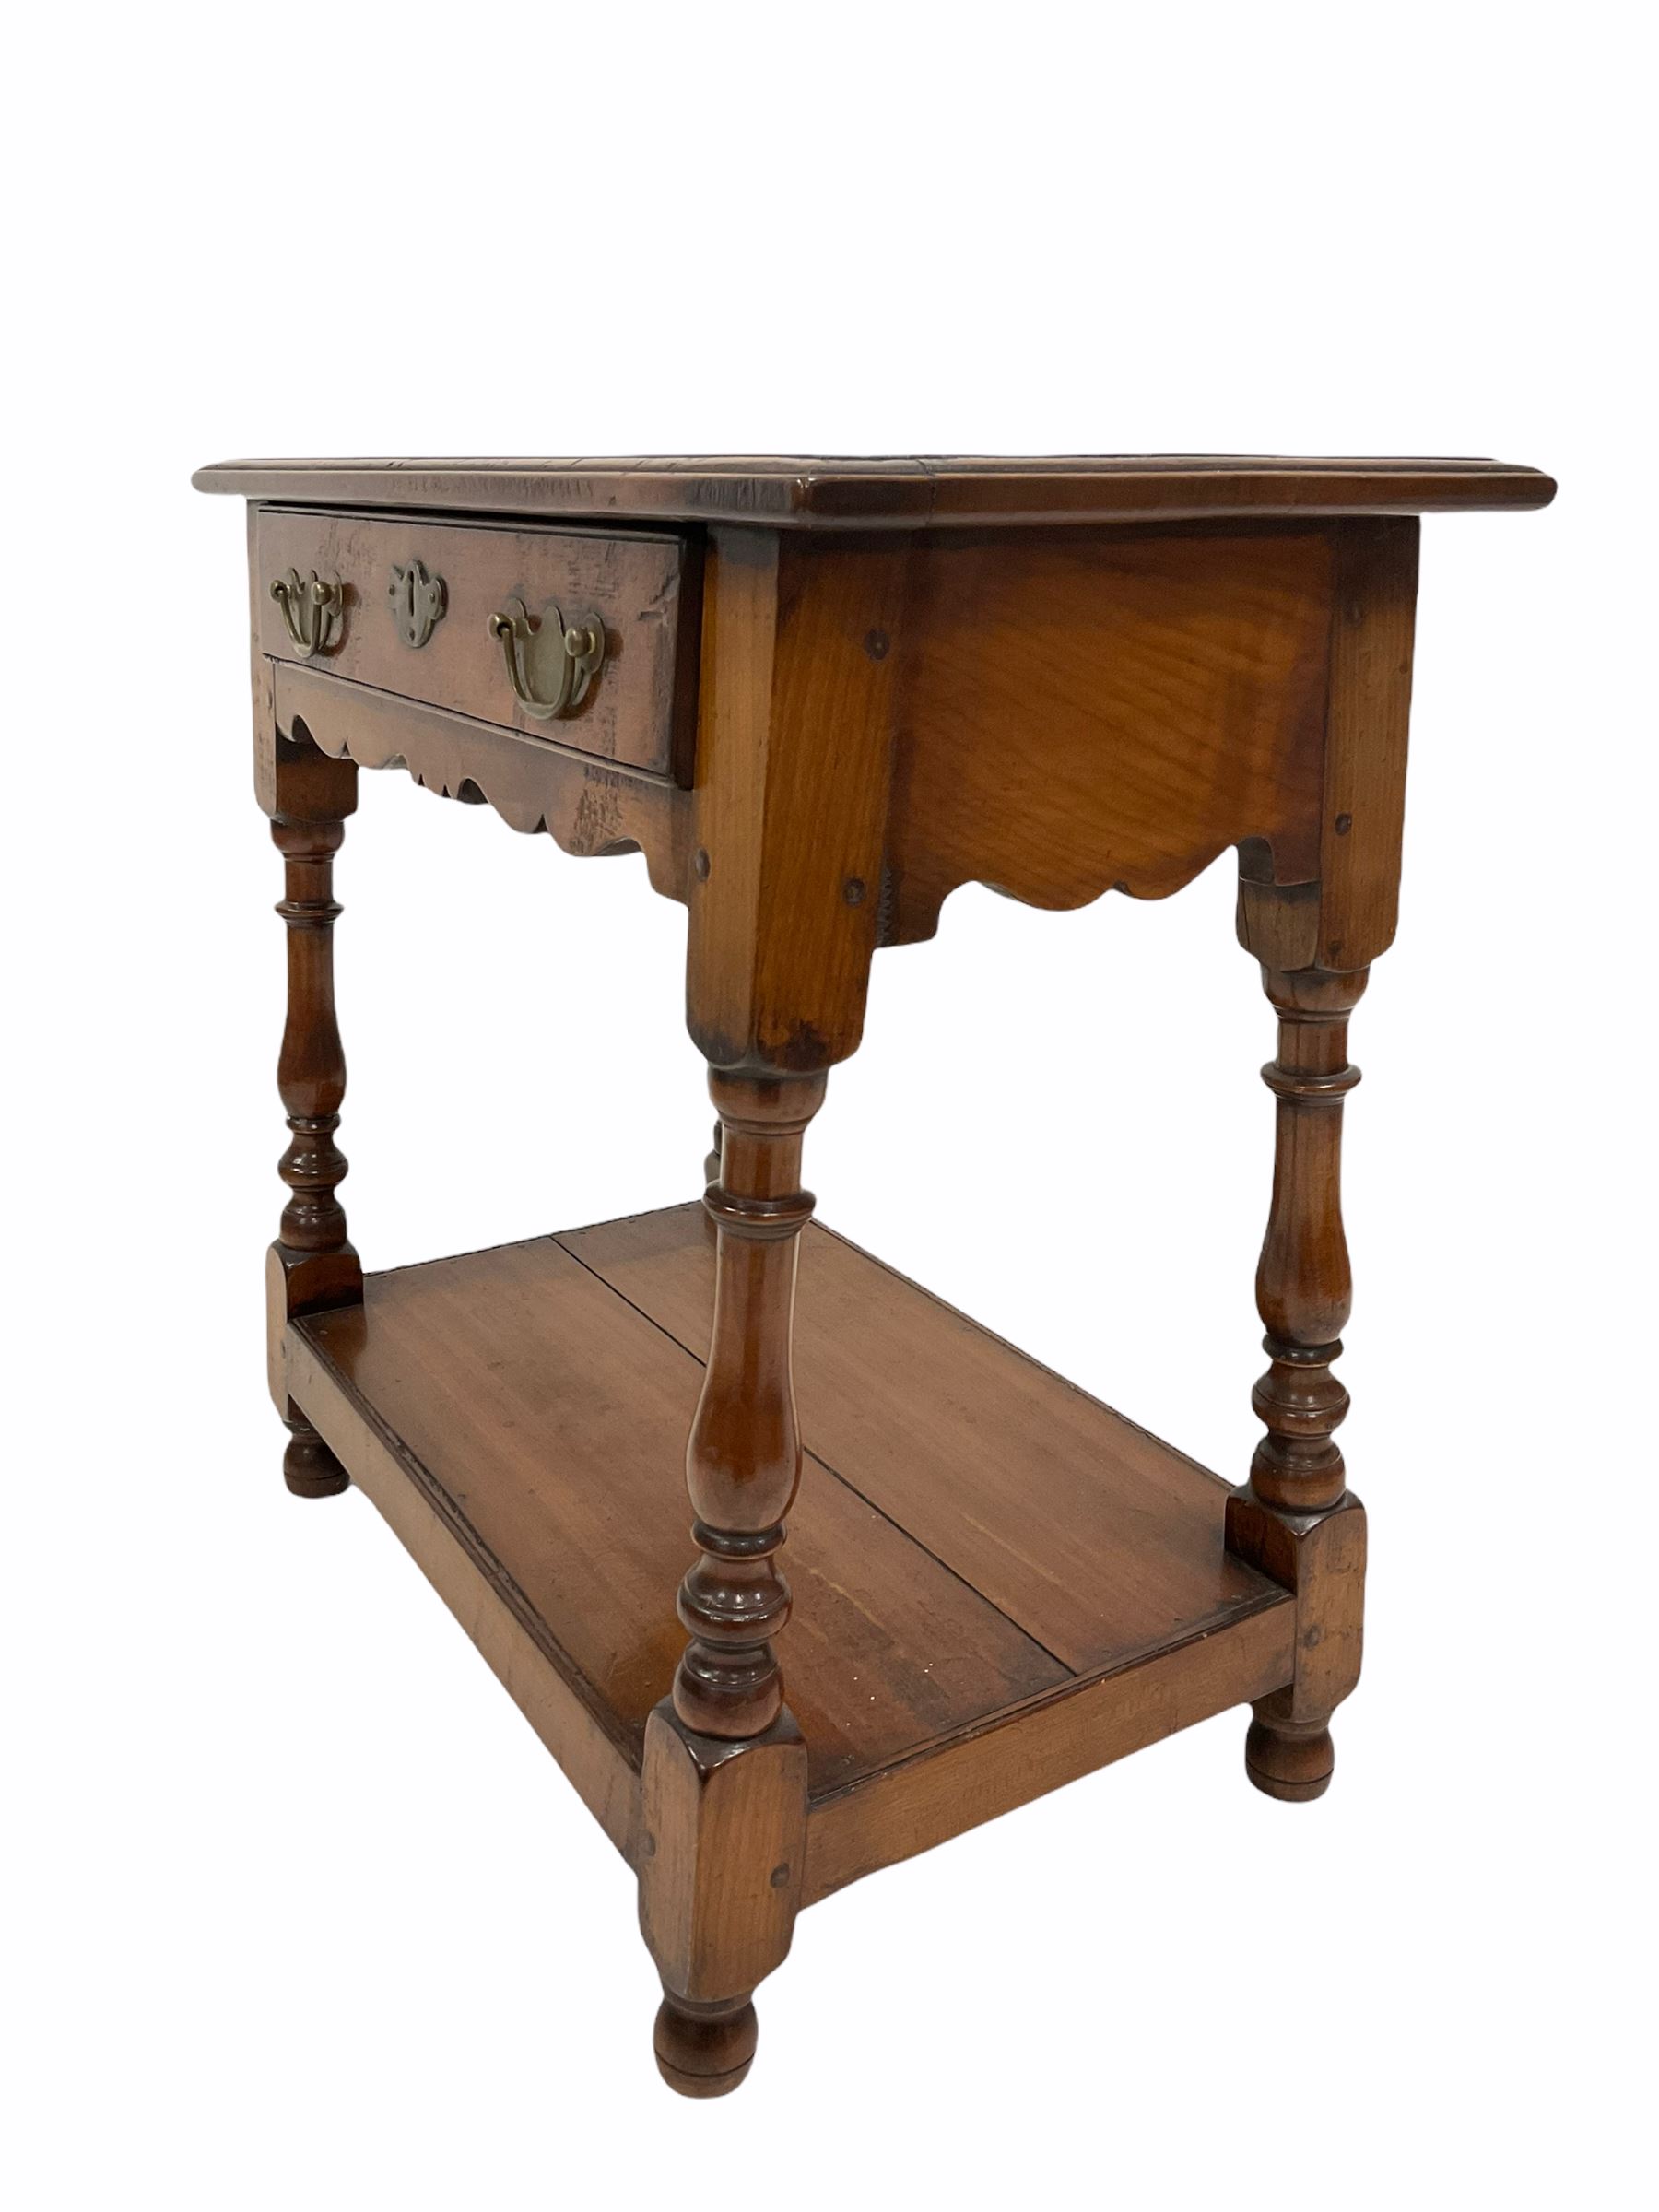 Late 18th century style fruitwood side table - Image 2 of 3